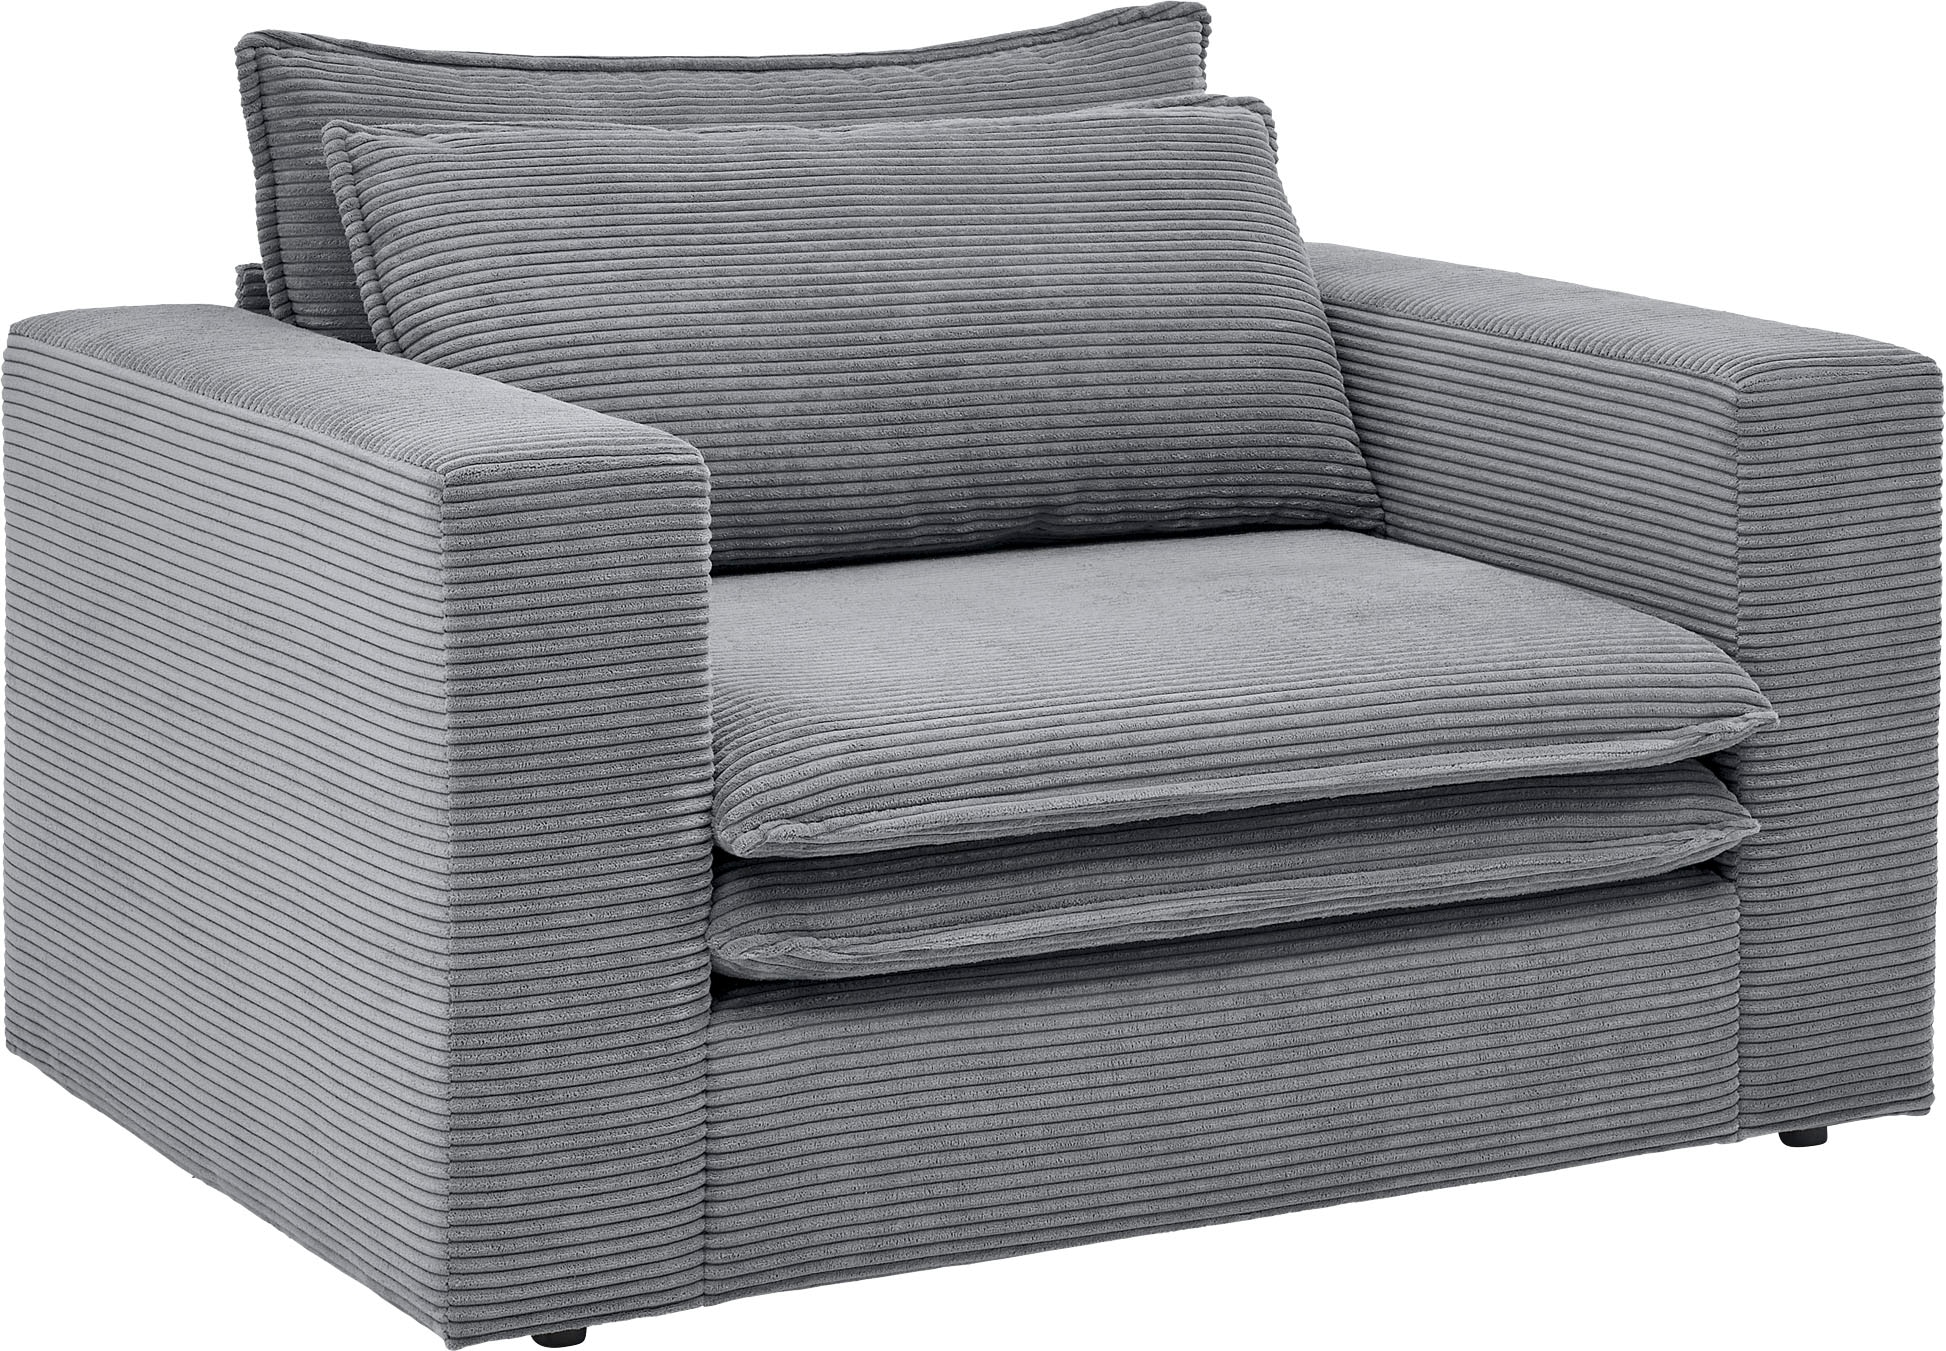 Places of Style OTTO bei trendiger Loveseat Hochwertiger Cord, »PIAGGE«, Loveseat